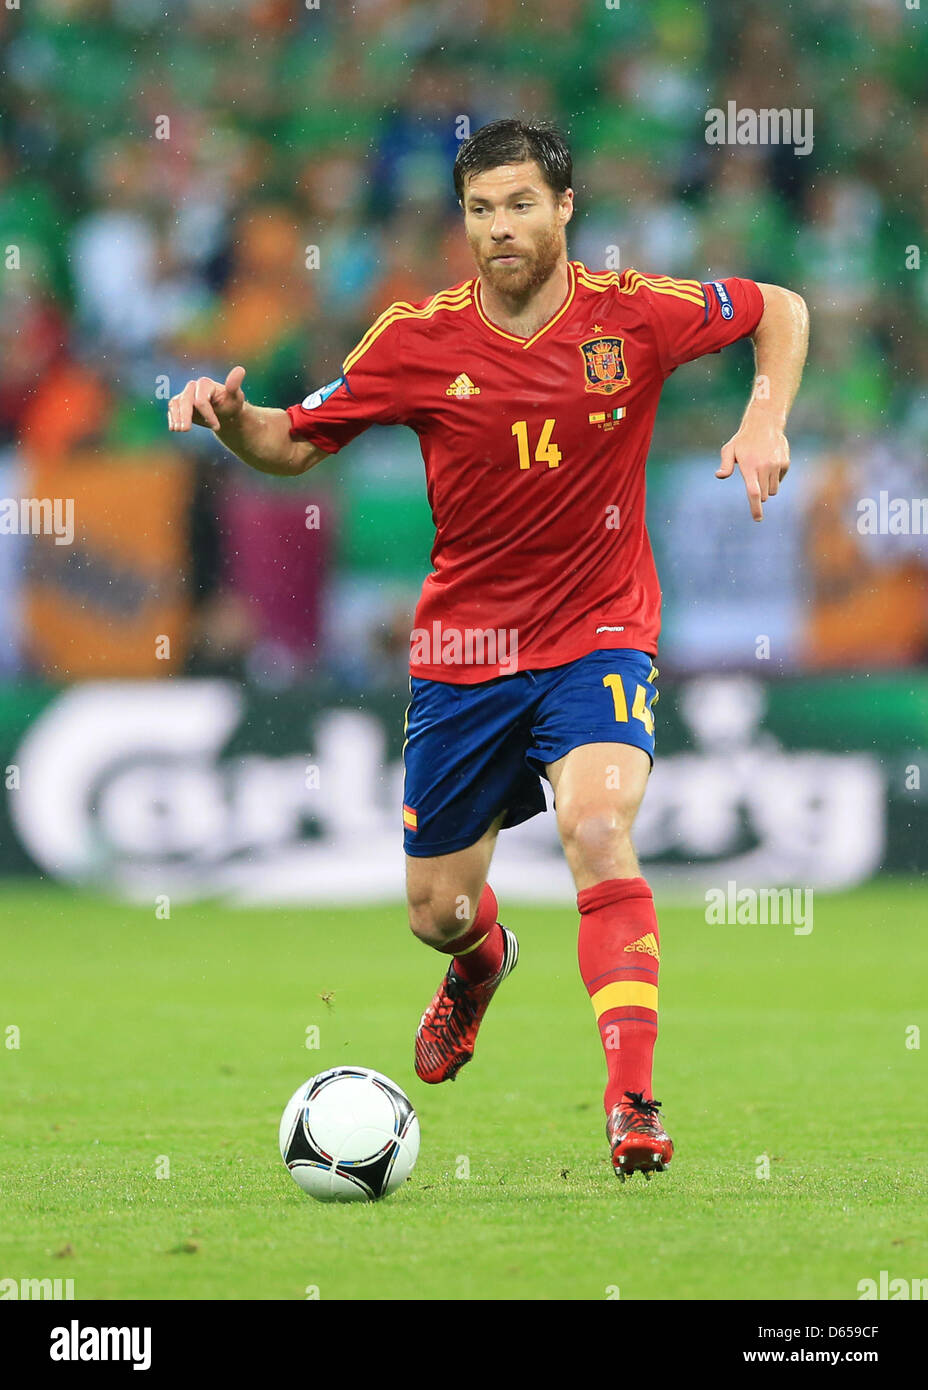 Spain's Xabi Alonso during the UEFA EURO 2012 group C soccer match Spain vs Republic of Ireland at Arena Gdansk in Gdansk, Poland, 14 June 2012. Photo: Jens Wolf dpa (Please refer to chapters 7 and 8 of http://dpaq.de/Ziovh for UEFA Euro 2012 Terms & Conditions) Stock Photo